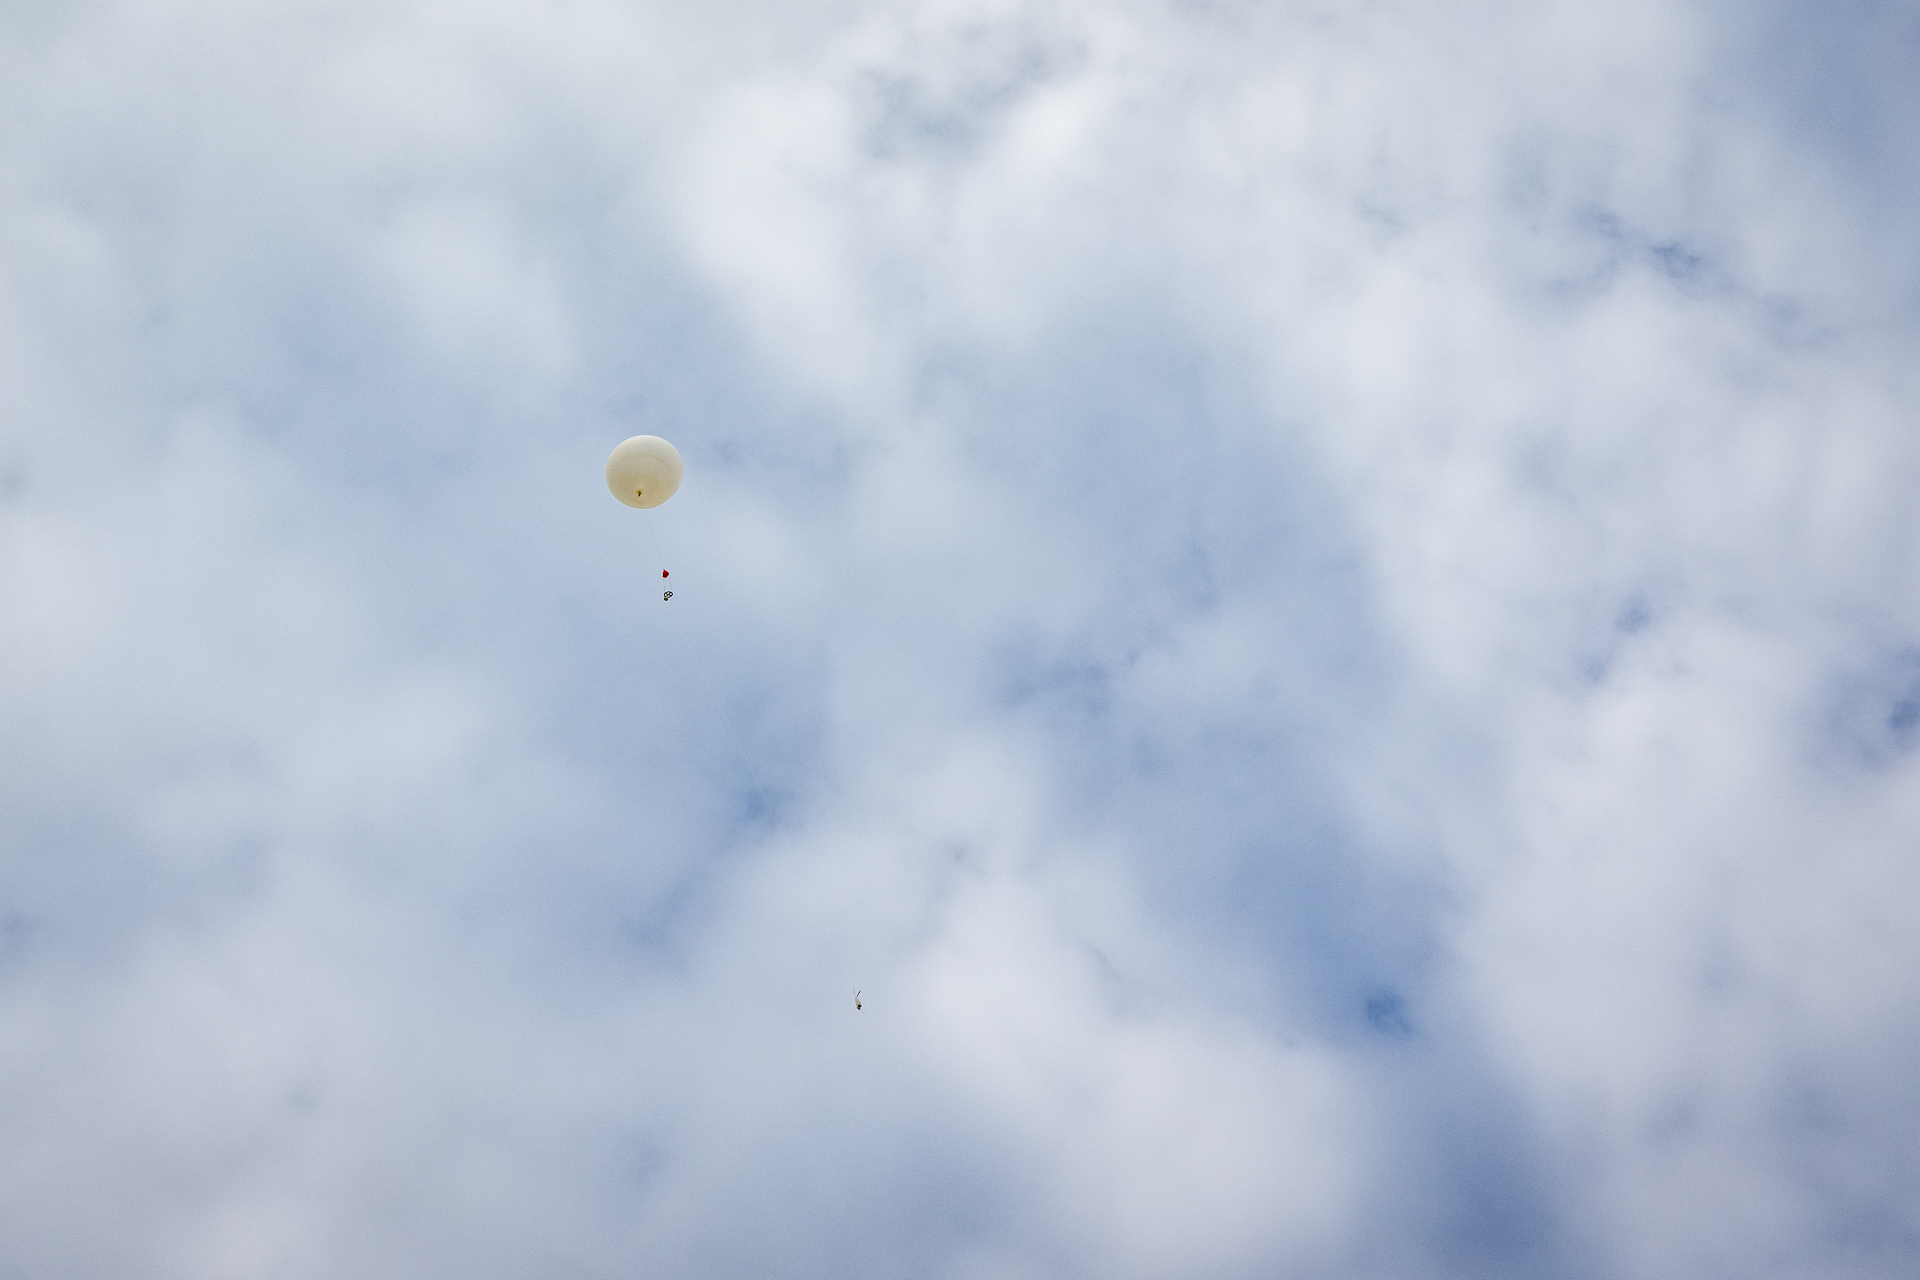 A white balloon with a string hanging from it floats in the sky with clouds behind it.